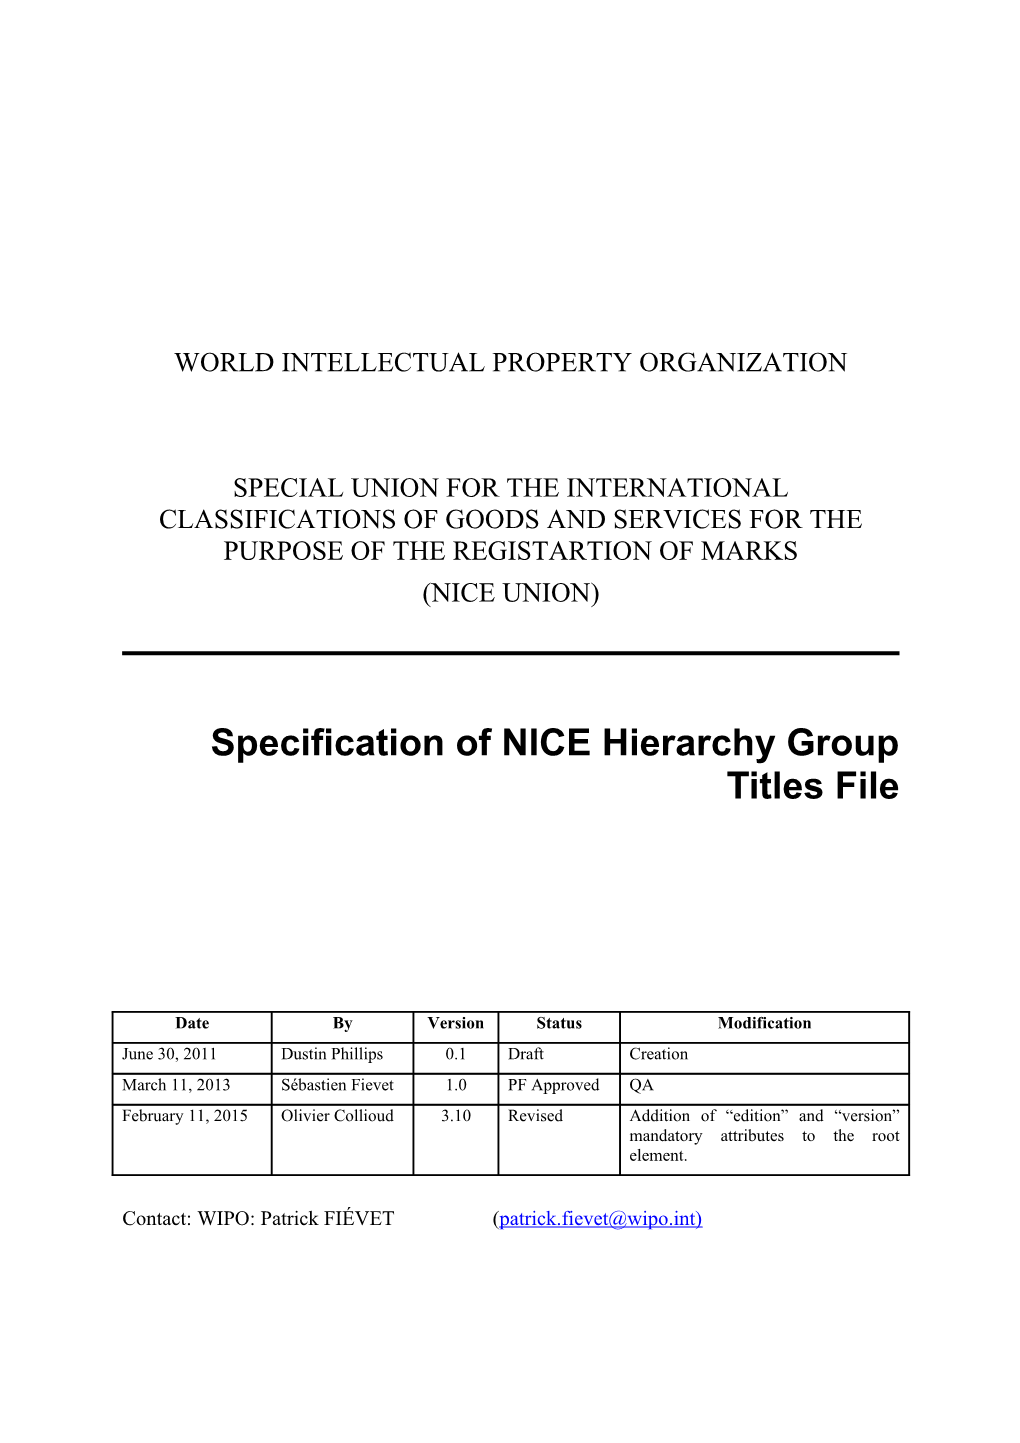 Specification of NICE Hierarchy Group Titles File